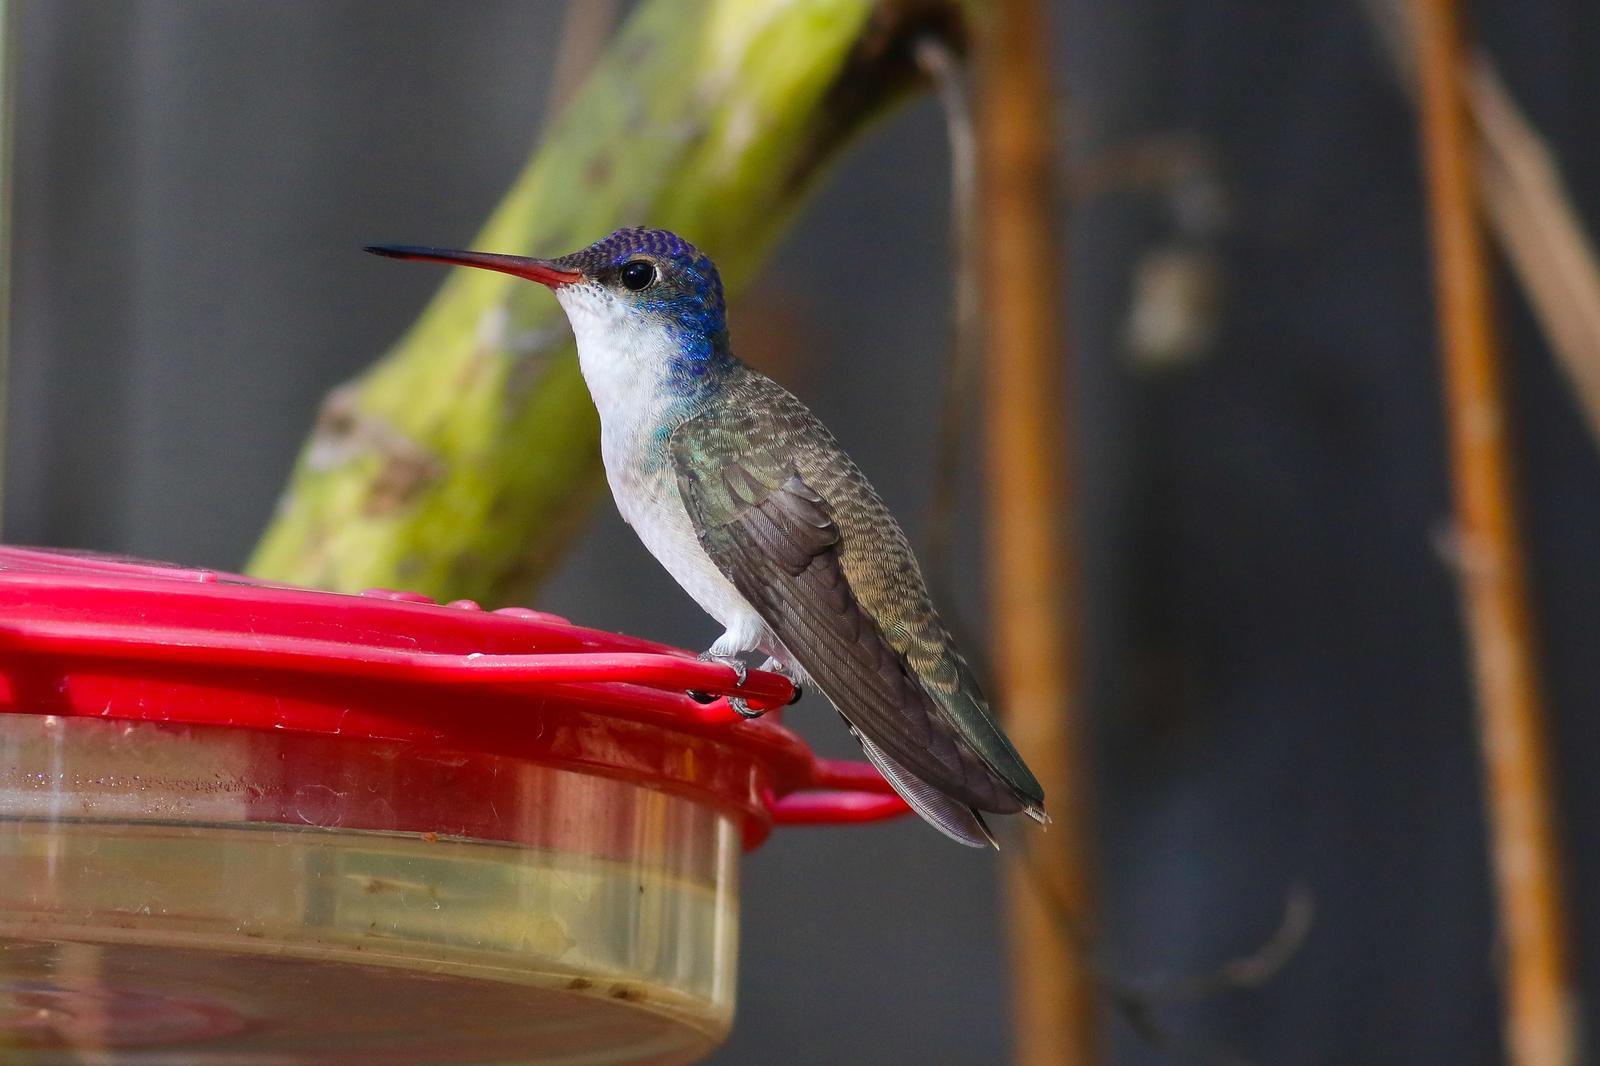 Violet-crowned Hummingbird Photo by Tom Ford-Hutchinson